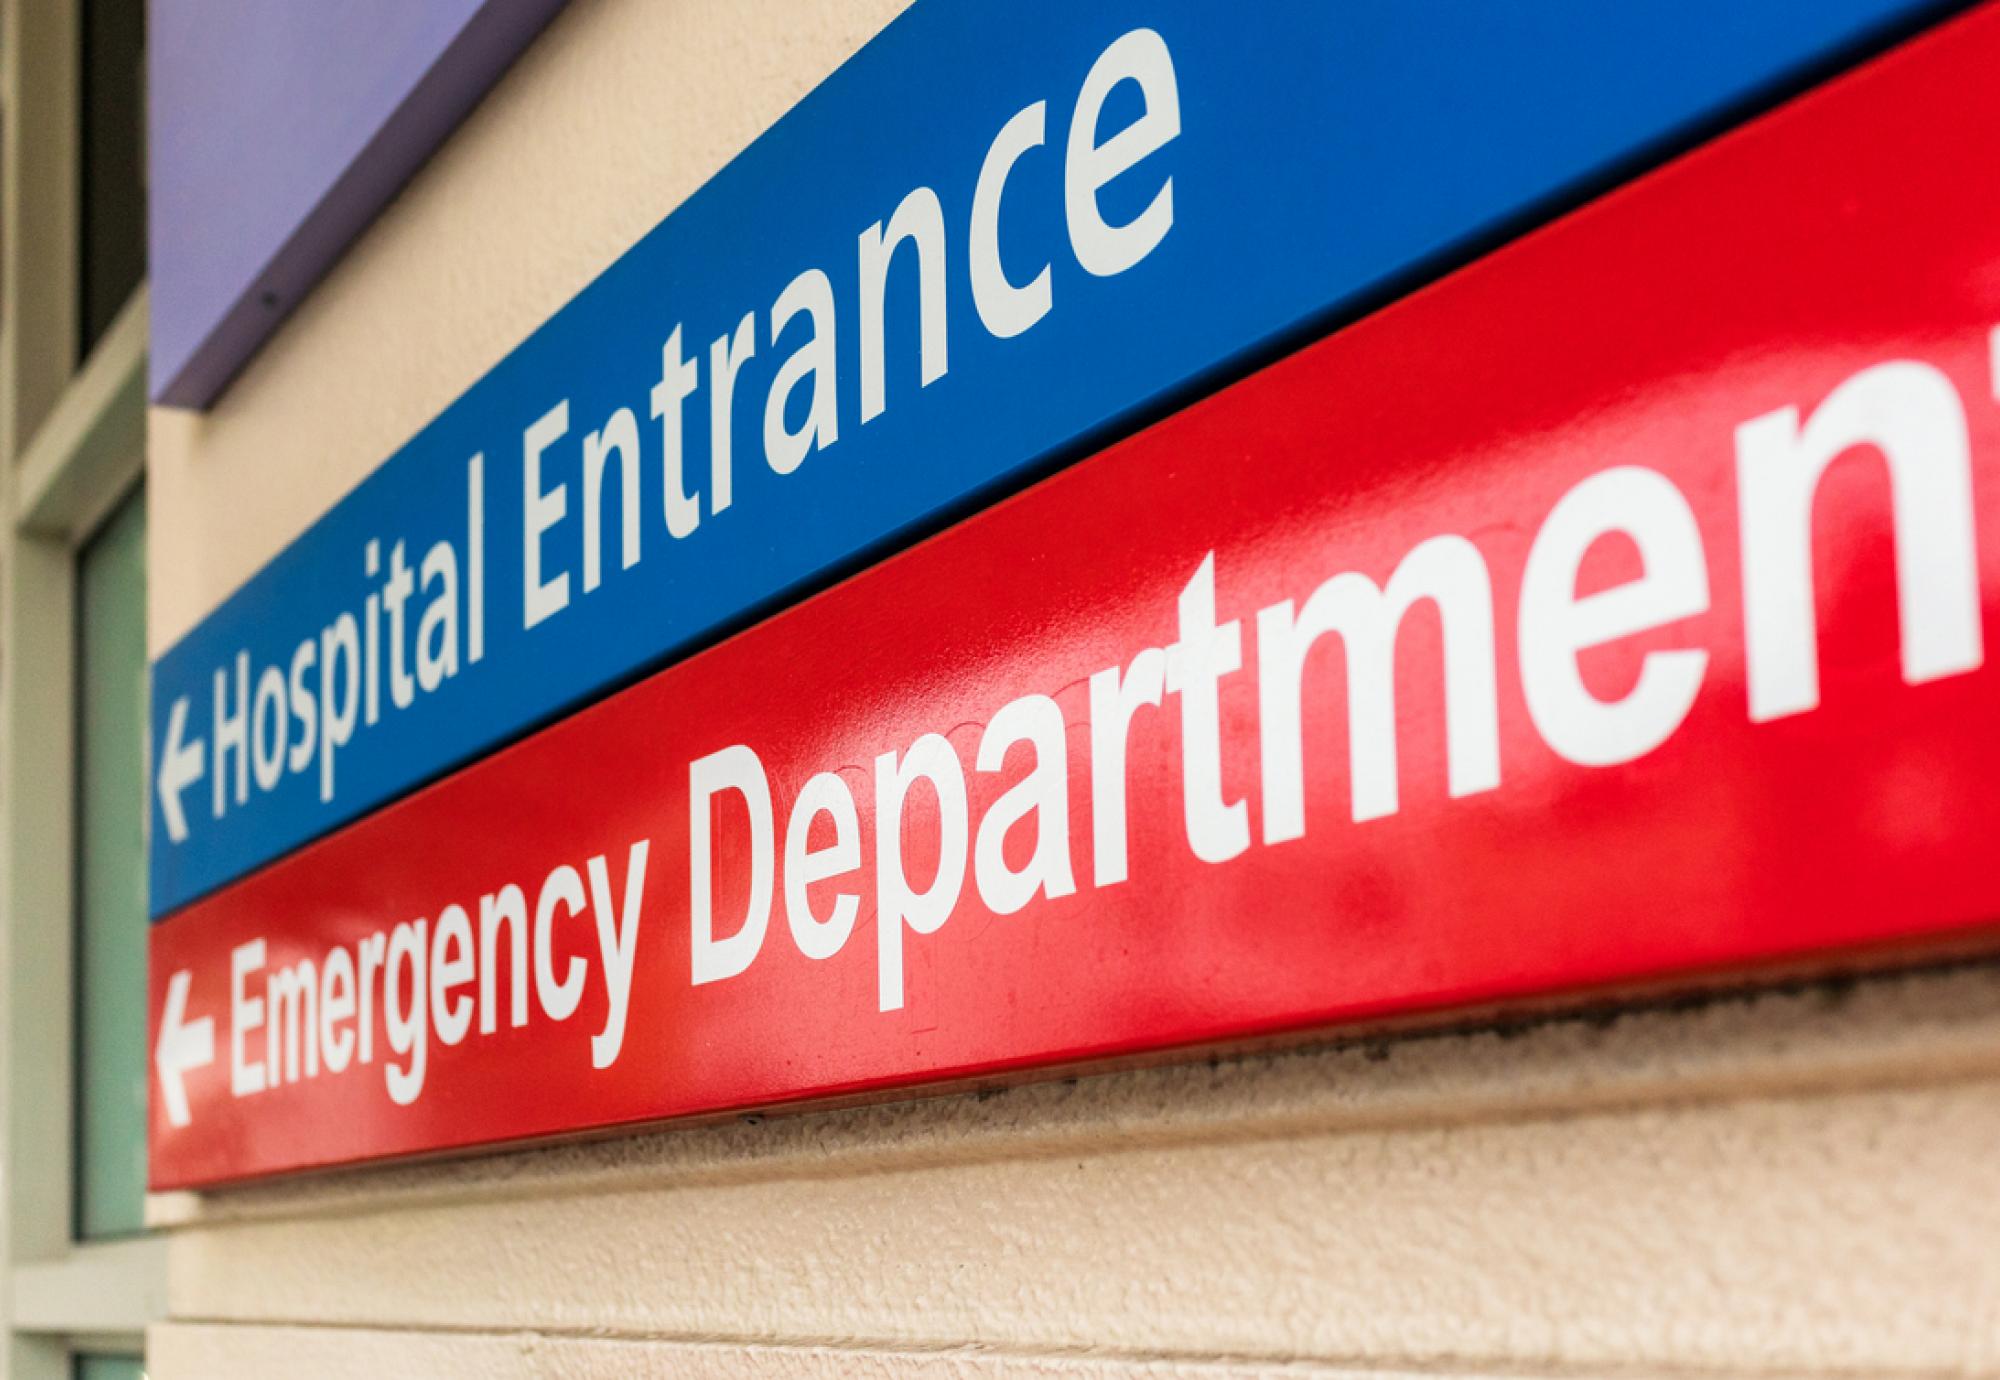 Hospital entrance and emergency department sign